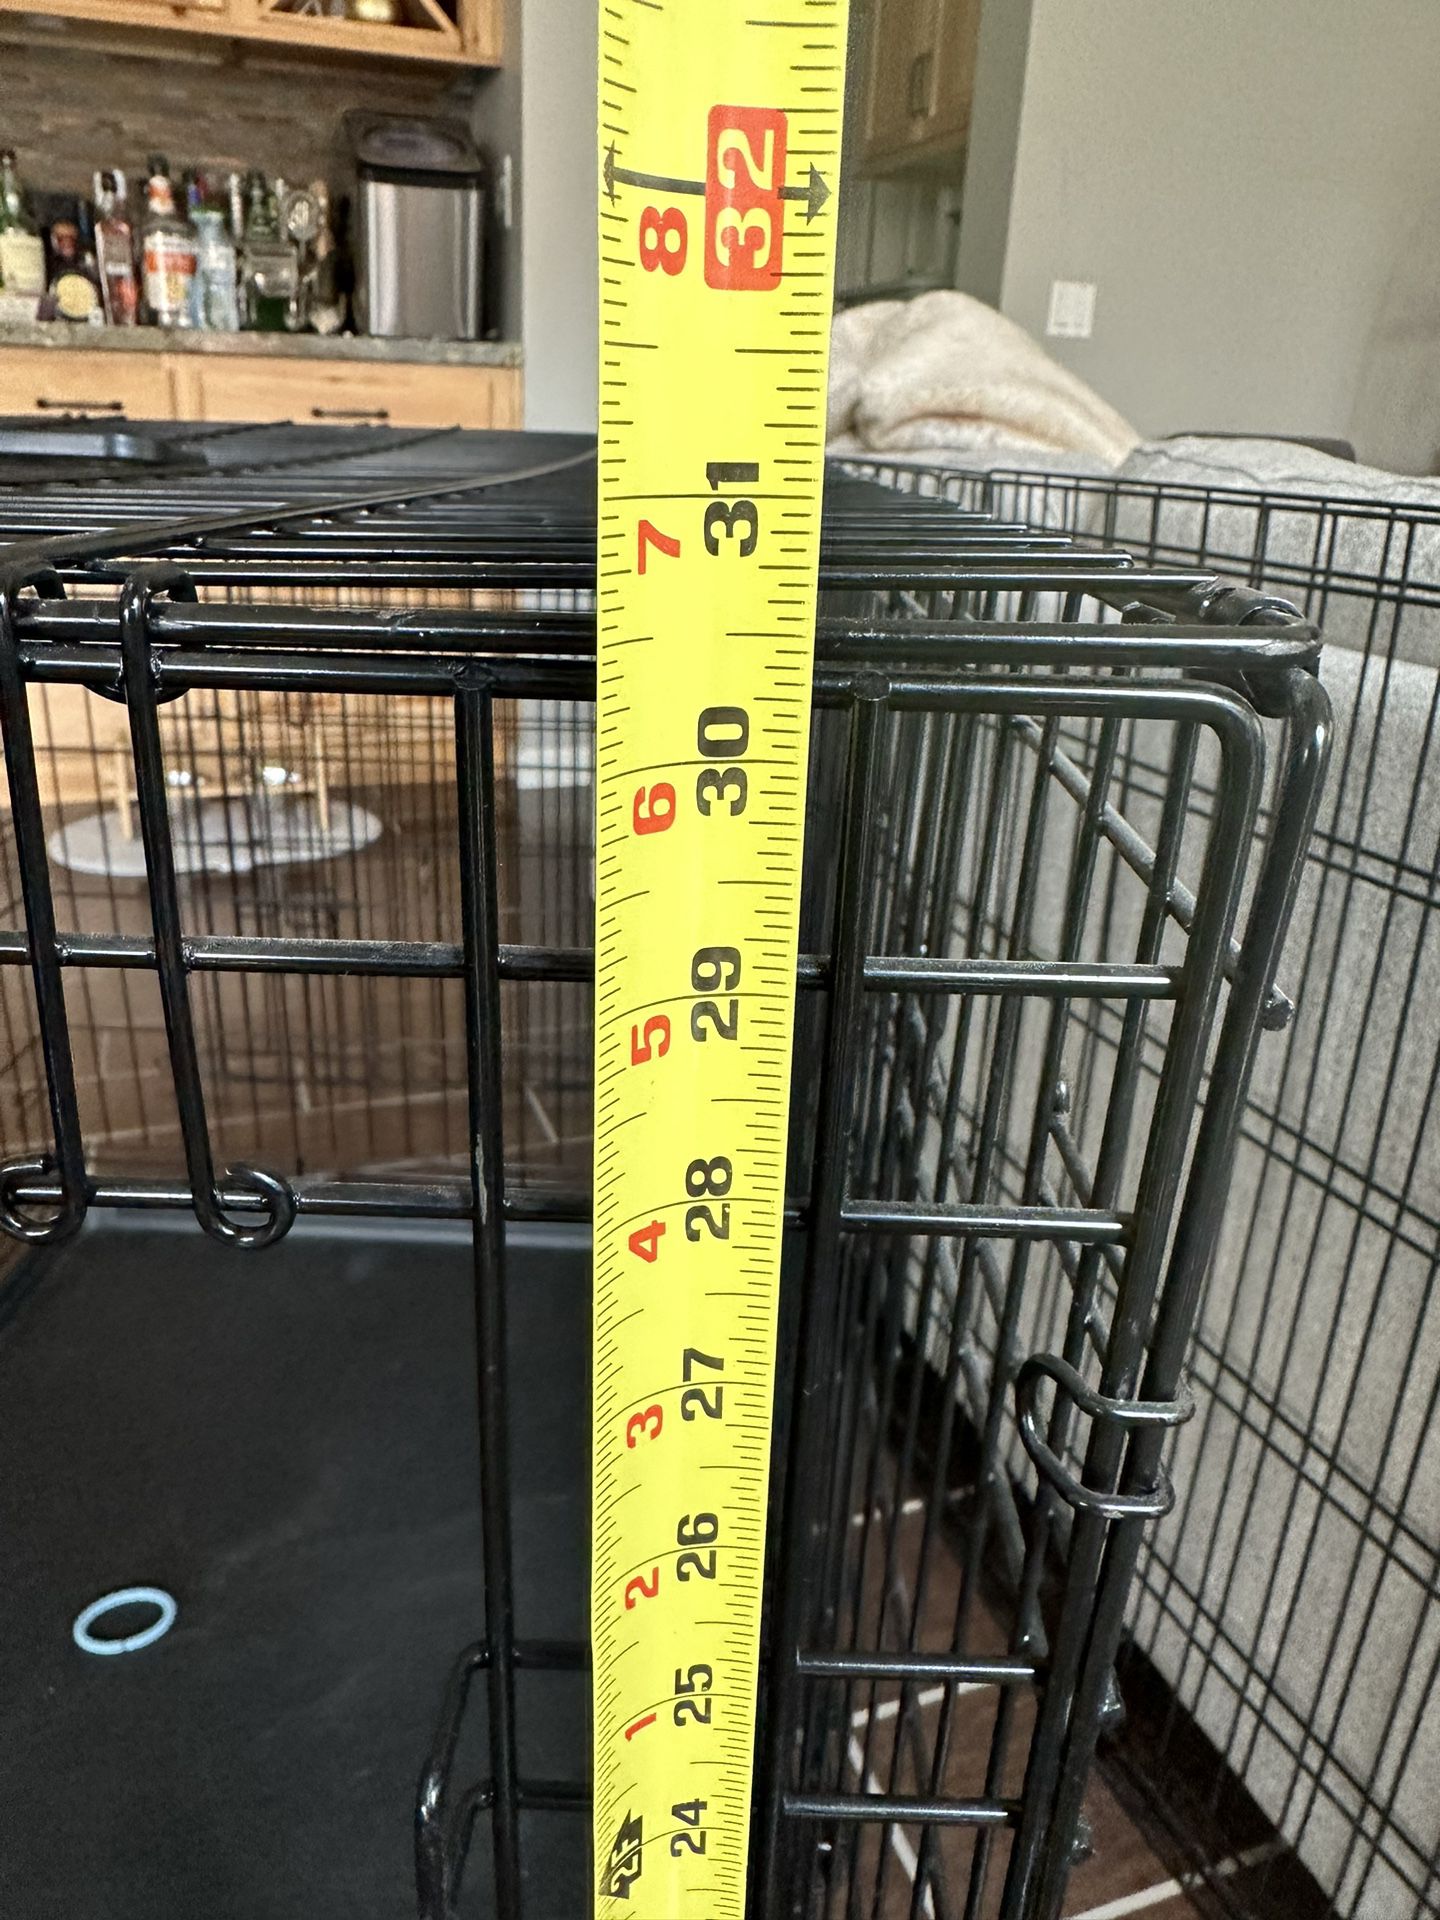 Dog Crate For Medium Size